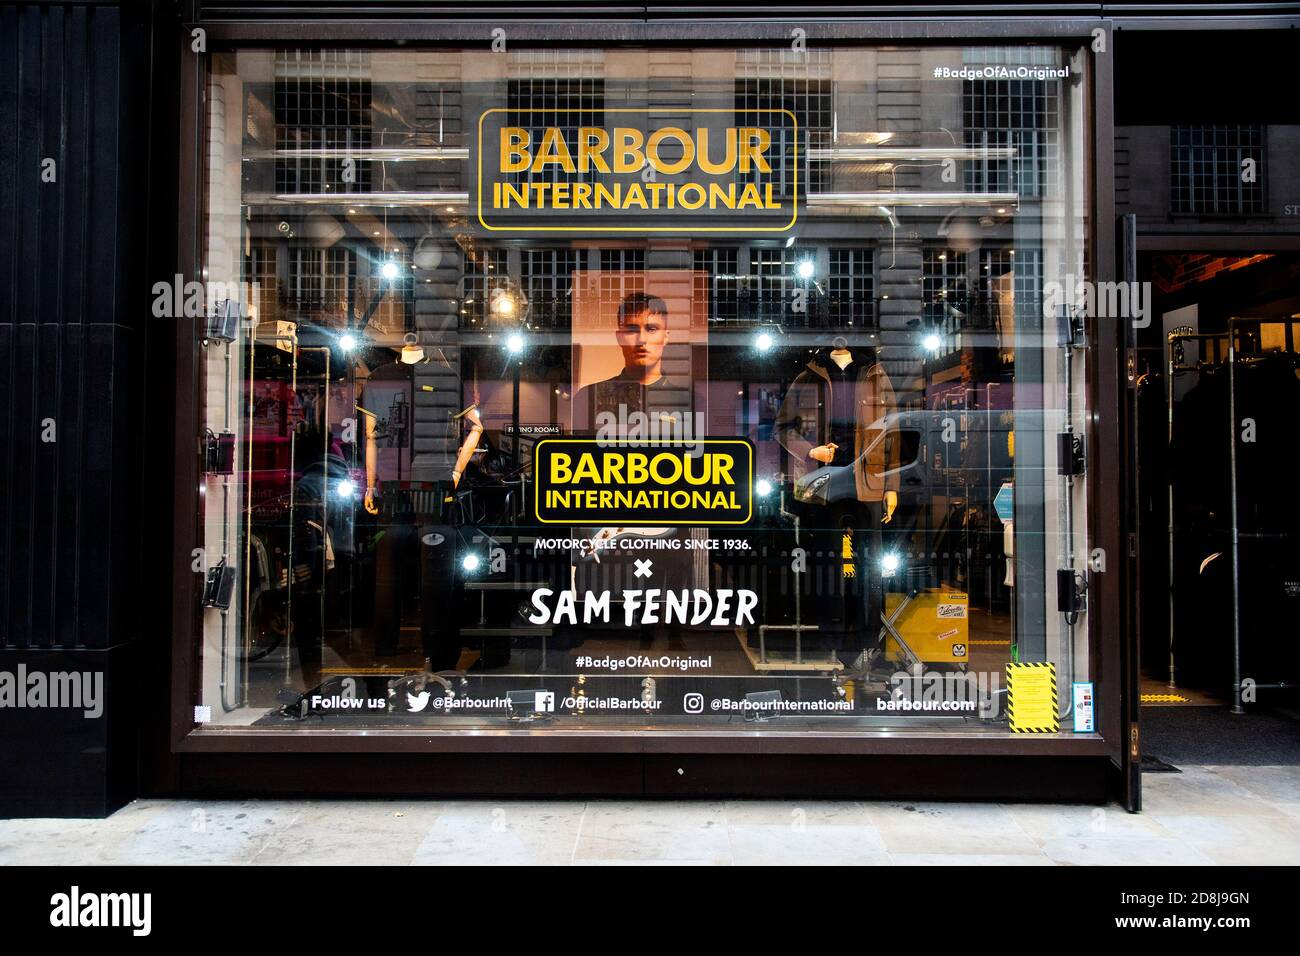 Barbour Piccadilly Circus Flash Sales, GET 59% OFF, www.seakinggroup.co.uk